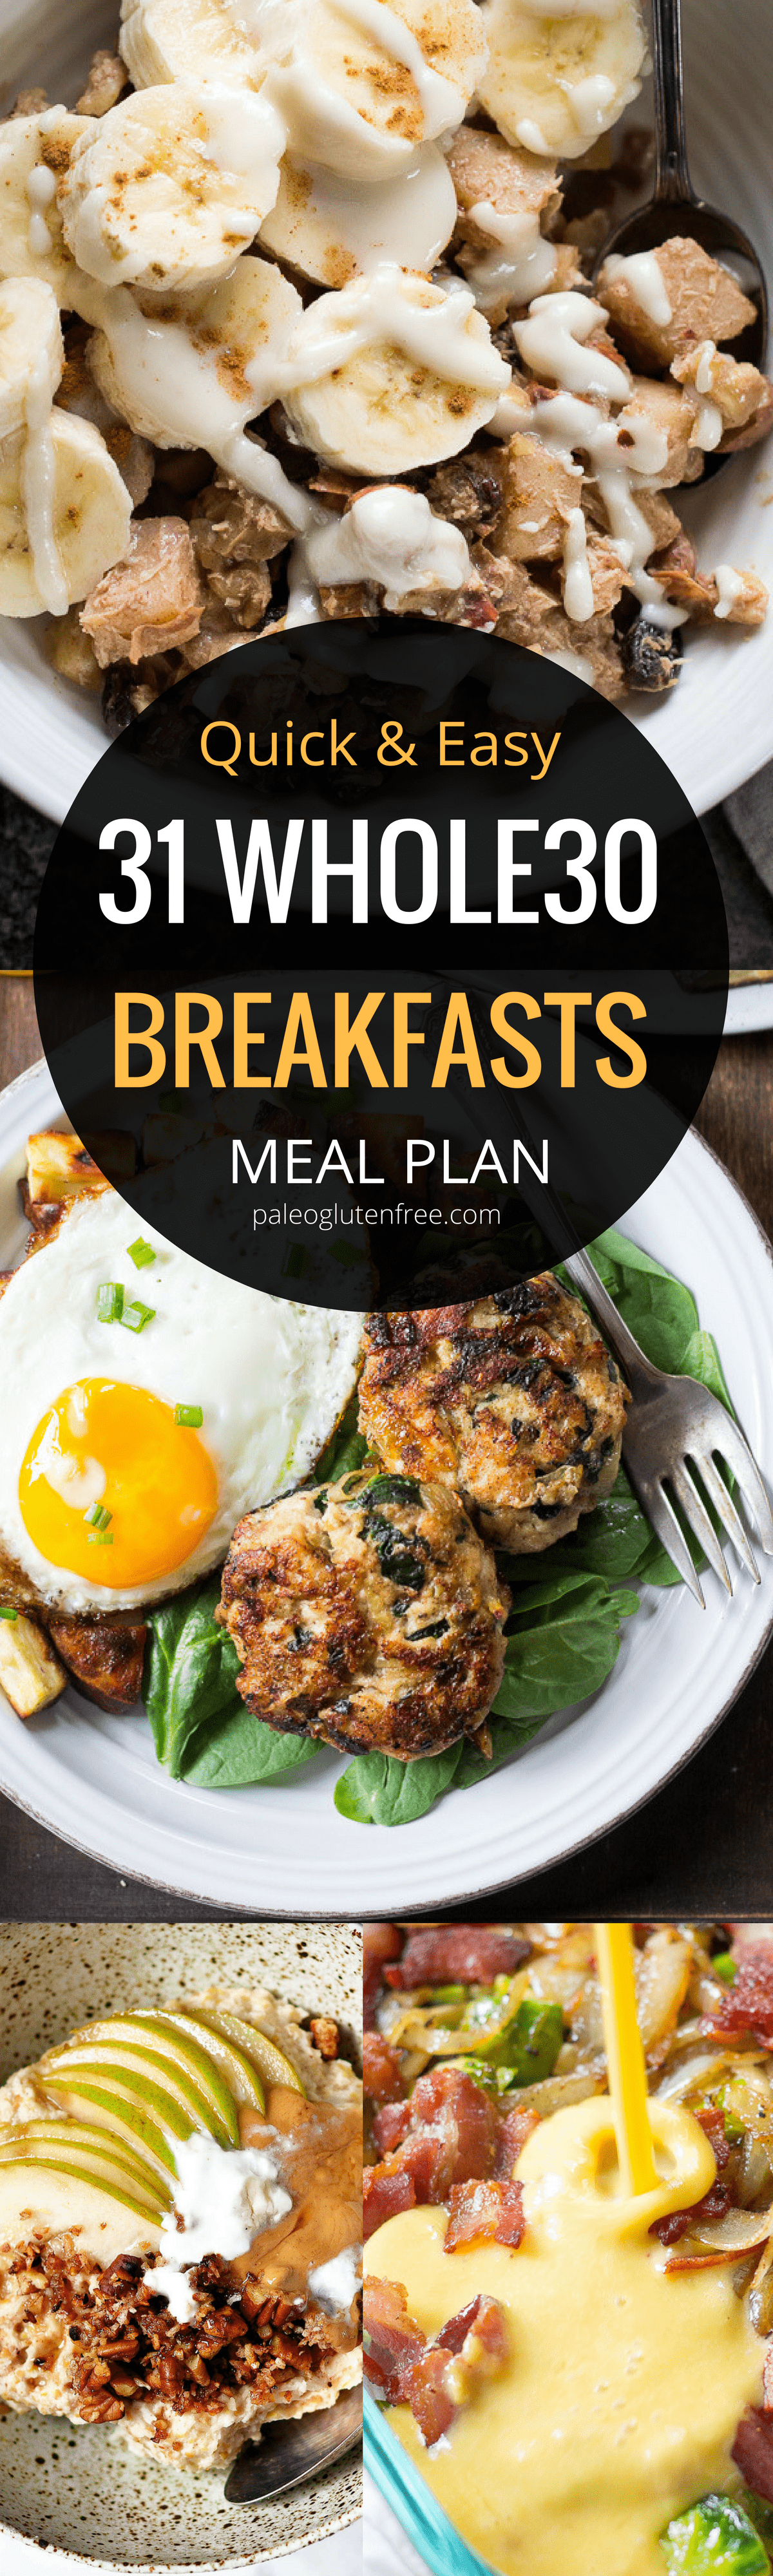 Best whole30 breakfast recipes all in one place. 31 days of whole30 breakfast recipes! Whole30 meal plan that's quick and healthy! Whole30 recipes just for you. Whole30 meal planning. Whole30 meal prep. Healthy paleo meals. Healthy Whole30 recipes. Easy Whole30 recipes. Best paleo shopping guide. Easy whole30 breakfast recipes. Easy whole30 breakfasts. Whole30 breakfast recipes. Best whole30 breakfast recipes. Easy whole30 breakfast recipes.